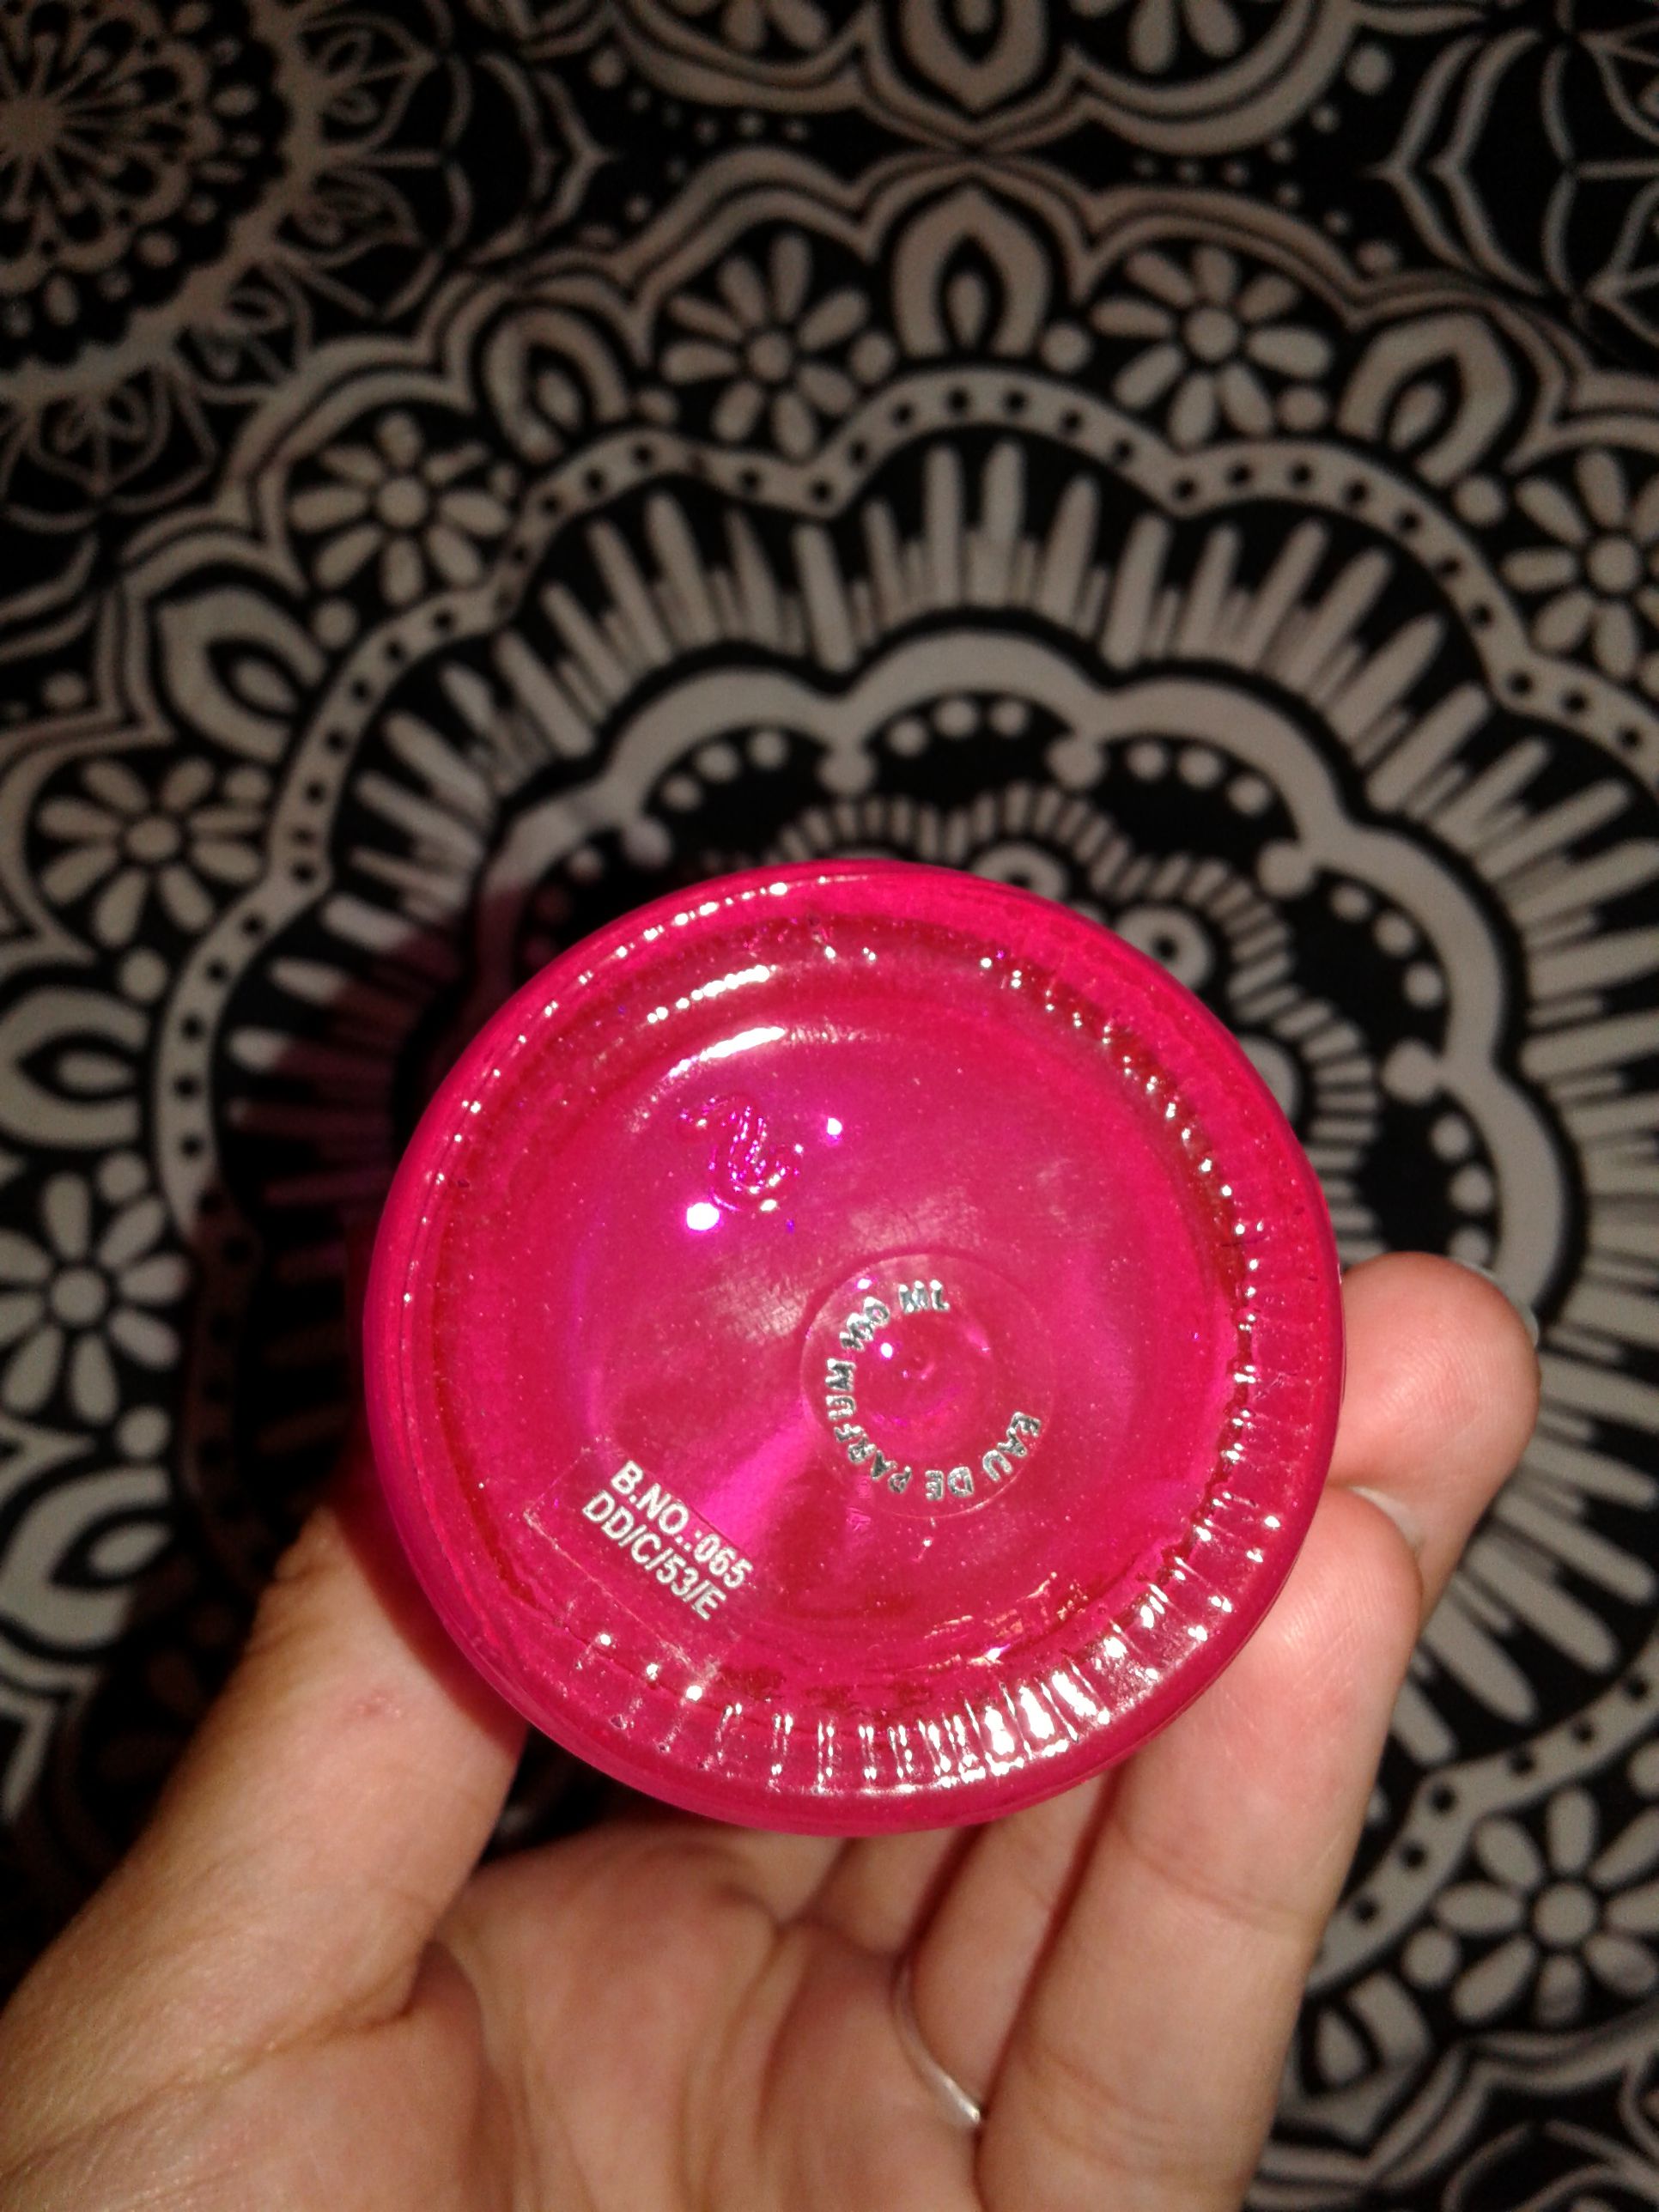 Pink Blush With Love Impression 3.4 Oz Perfume By Diamond Collection for  Sale in San Antonio, TX - OfferUp